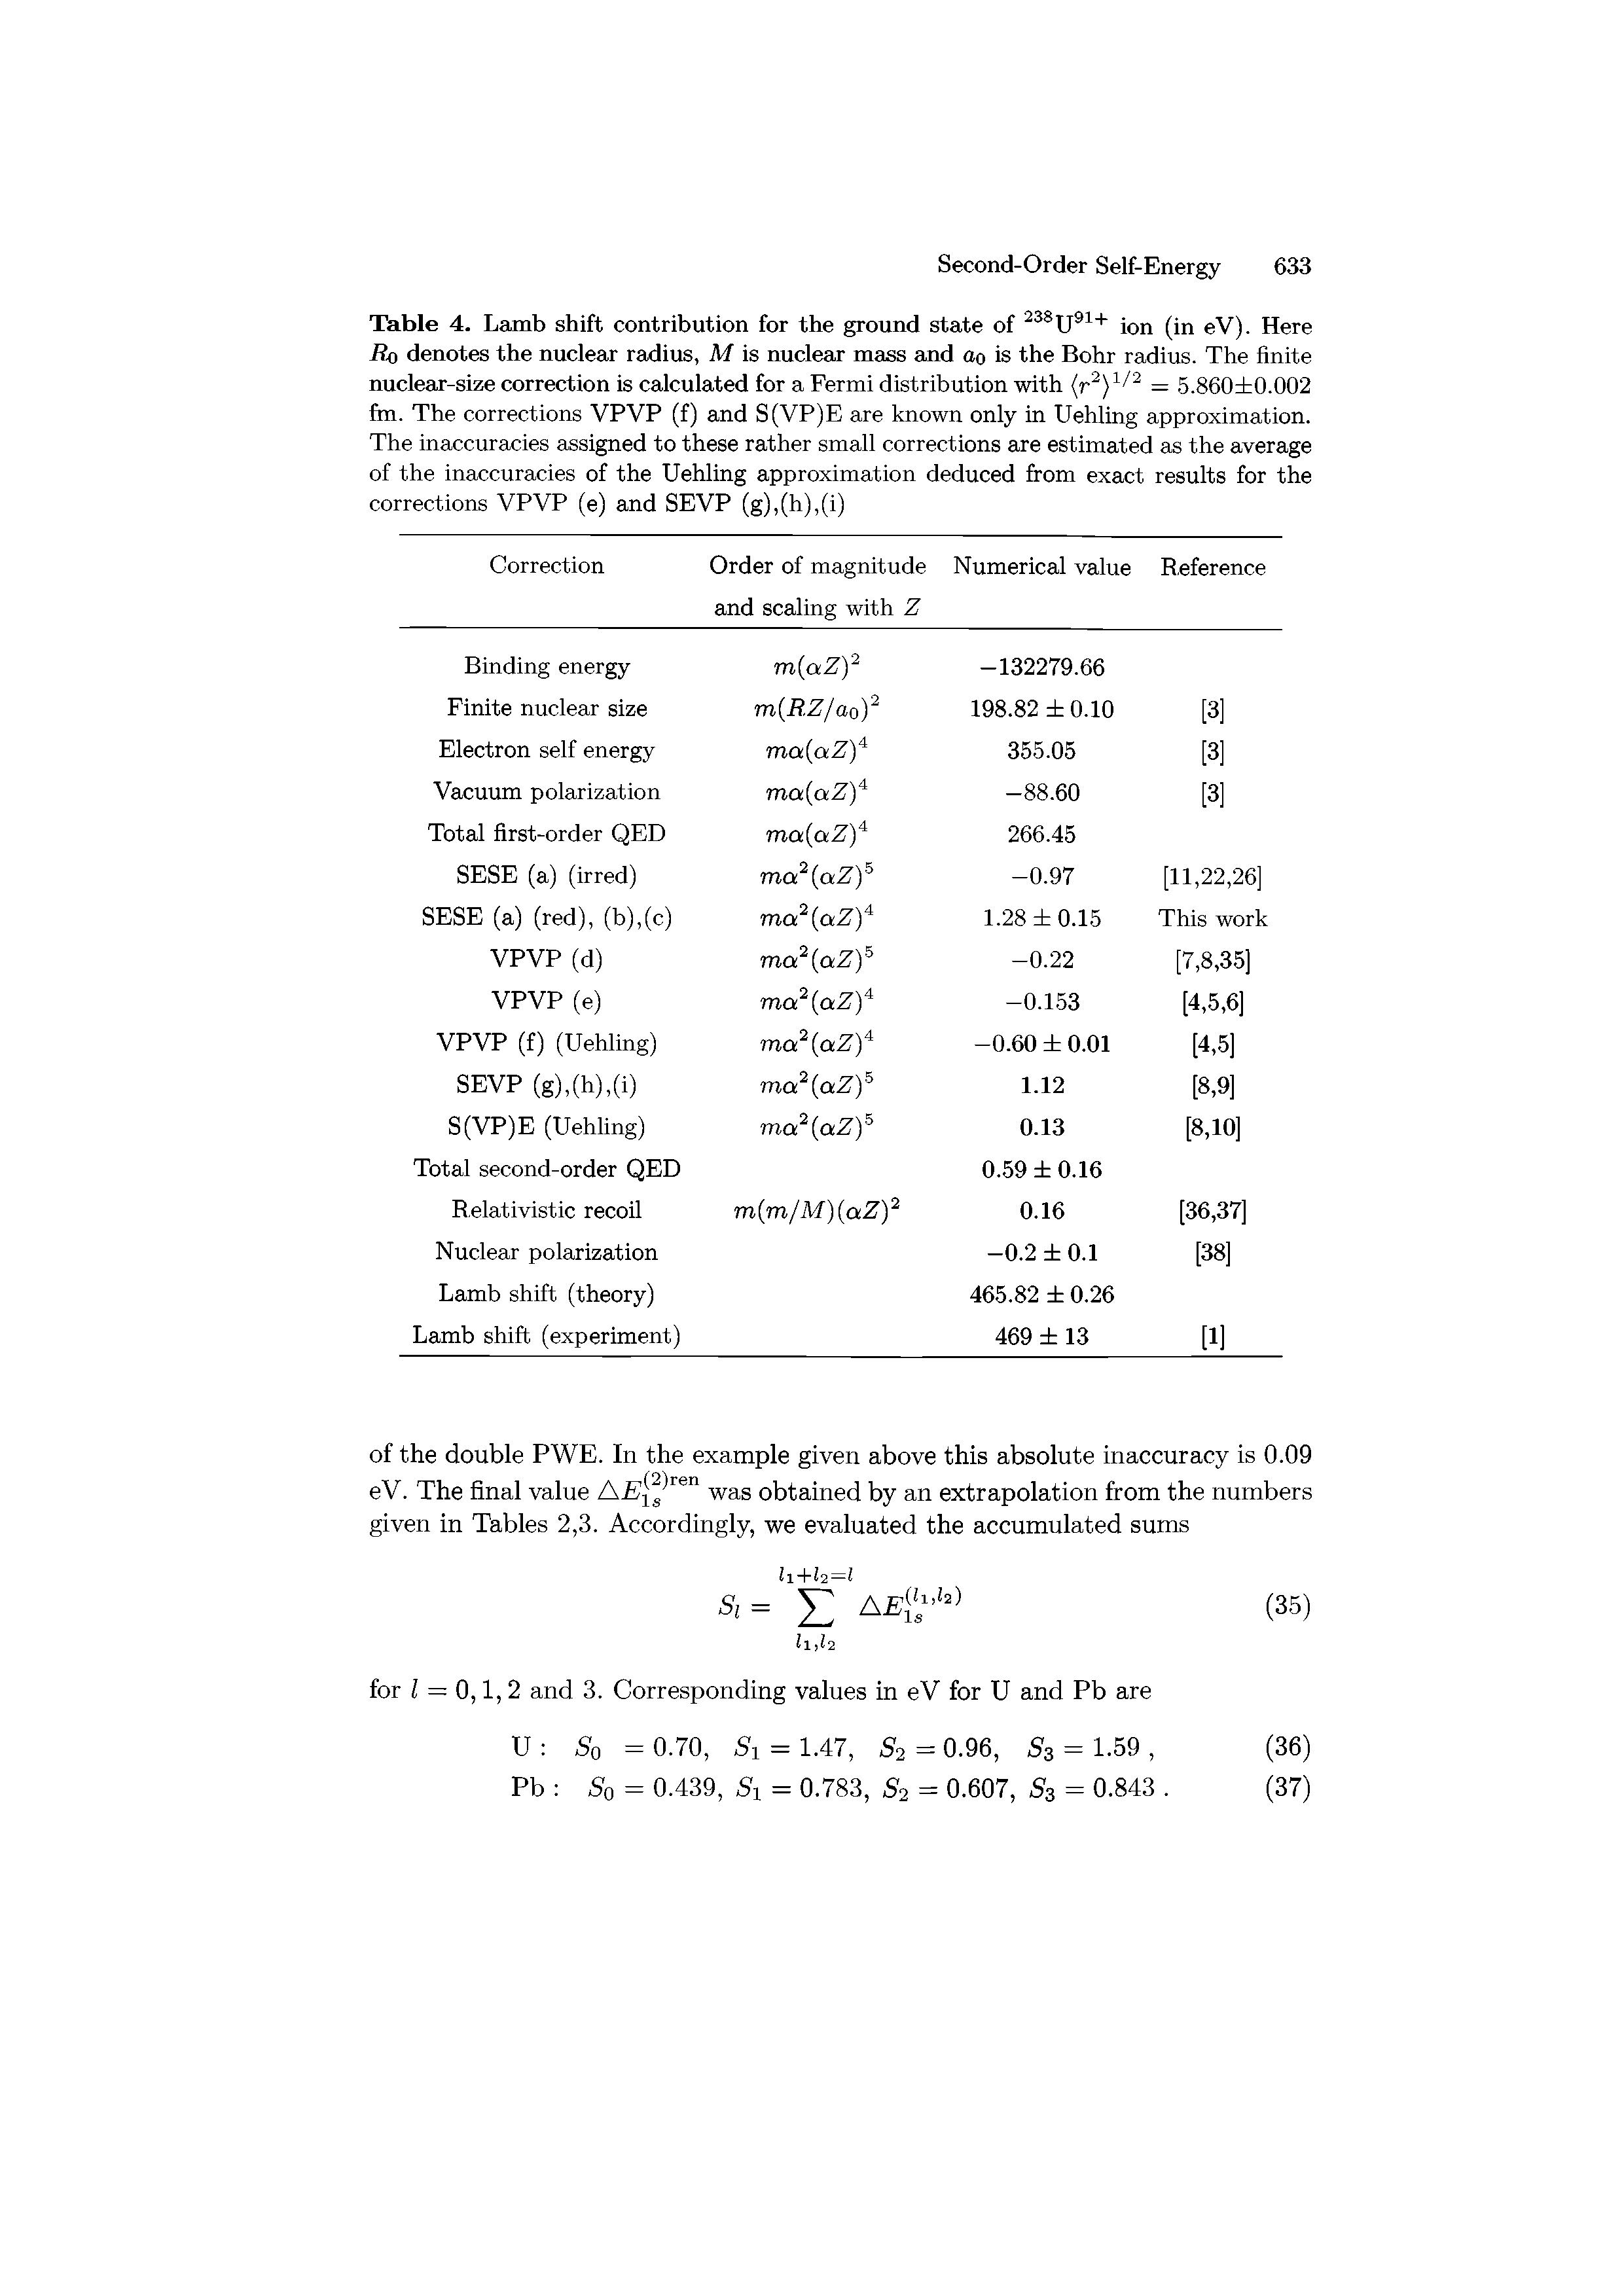 Table 4. Lamb shift contribution for the ground state of 238U91+ ion (in eV). Here Ro denotes the nuclear radius, M is nuclear mass and ao is the Bohr radius. The finite nuclear-size correction is calculated for a Fermi distribution with (r2)1 /2 = 5.860 0.002 fm. The corrections VPVP (f) and S(VP)E are known only in Uehling approximation. The inaccuracies assigned to these rather small corrections are estimated as the average of the inaccuracies of the Uehling approximation deduced from exact results for the corrections VPVP (e) and SEVP (g),(h),(i)...